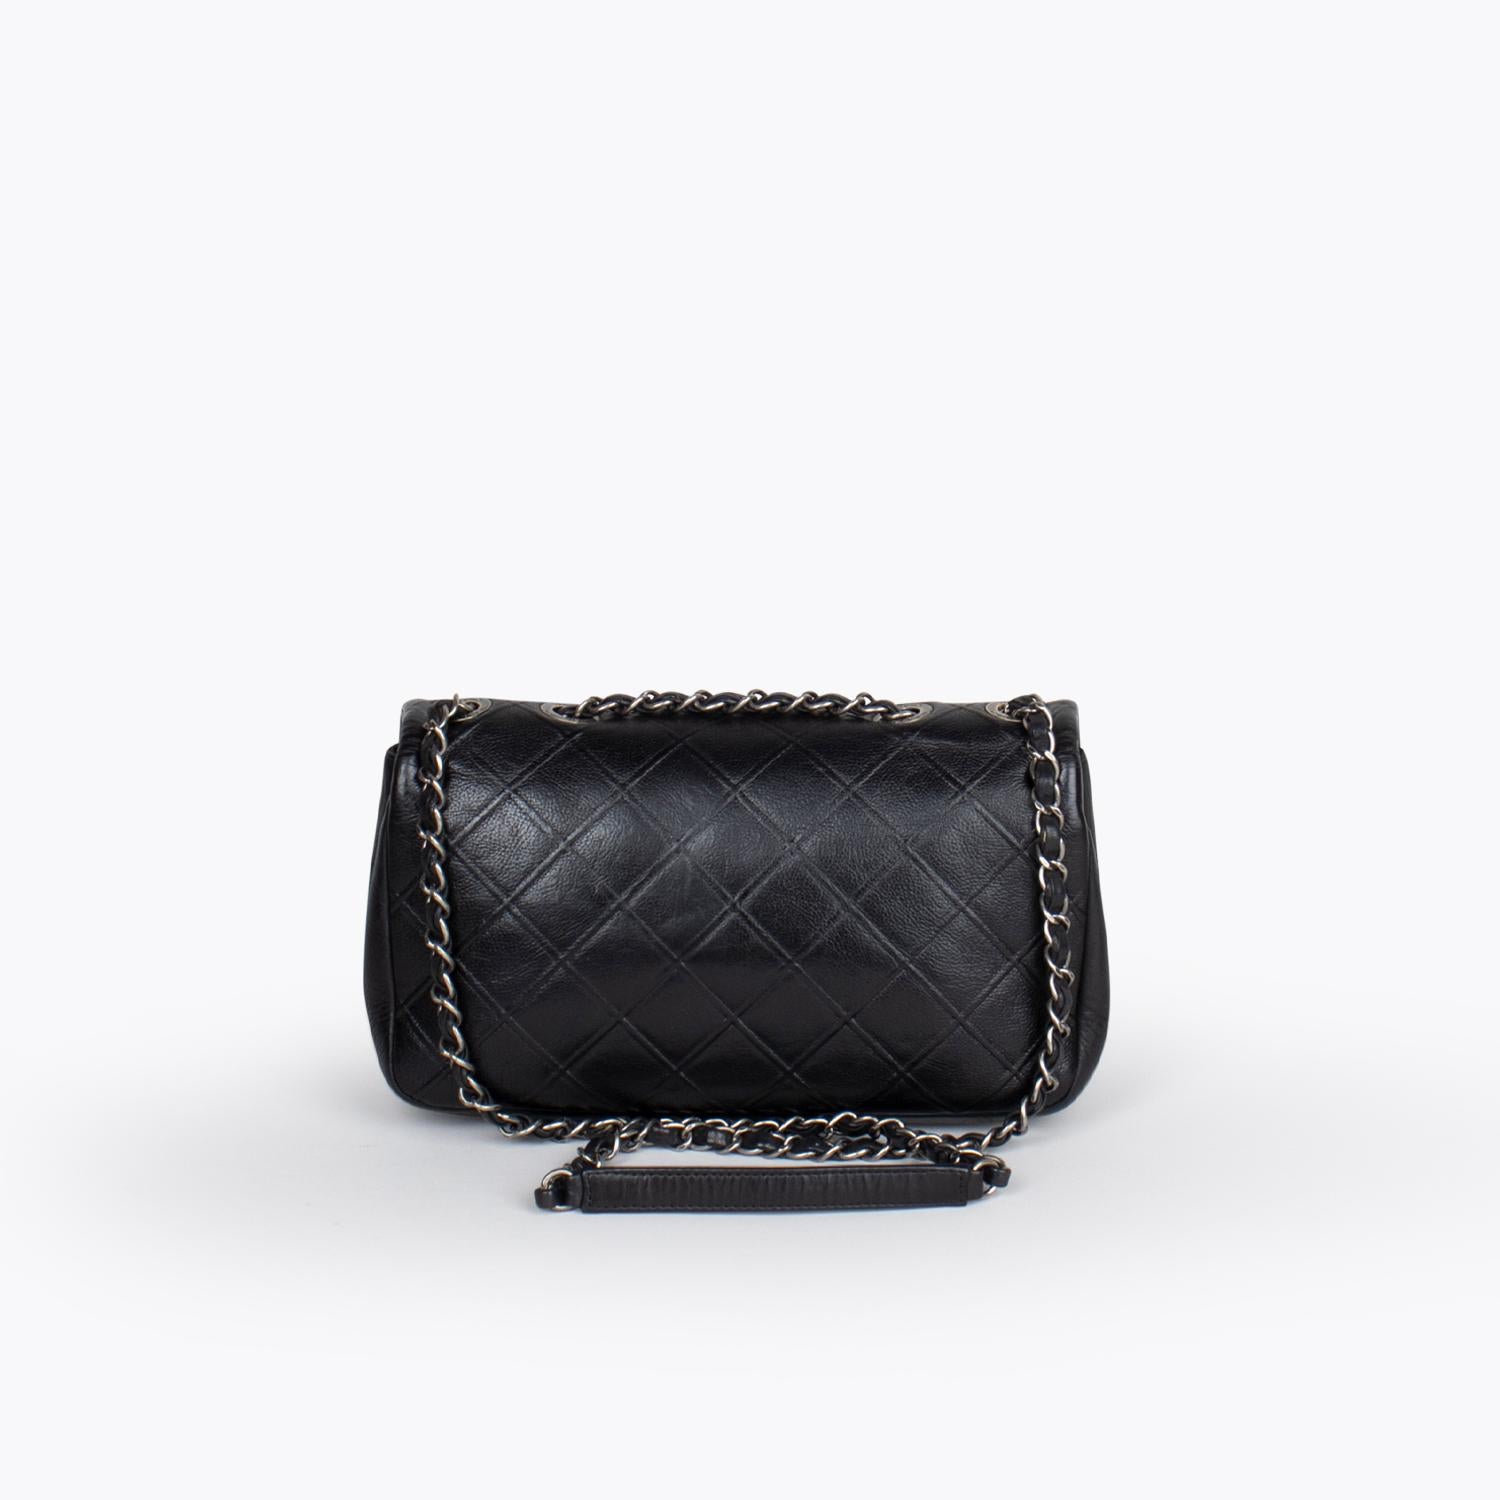 Chanel Cambon Single Flap Bag In Good Condition For Sale In Sundbyberg, SE